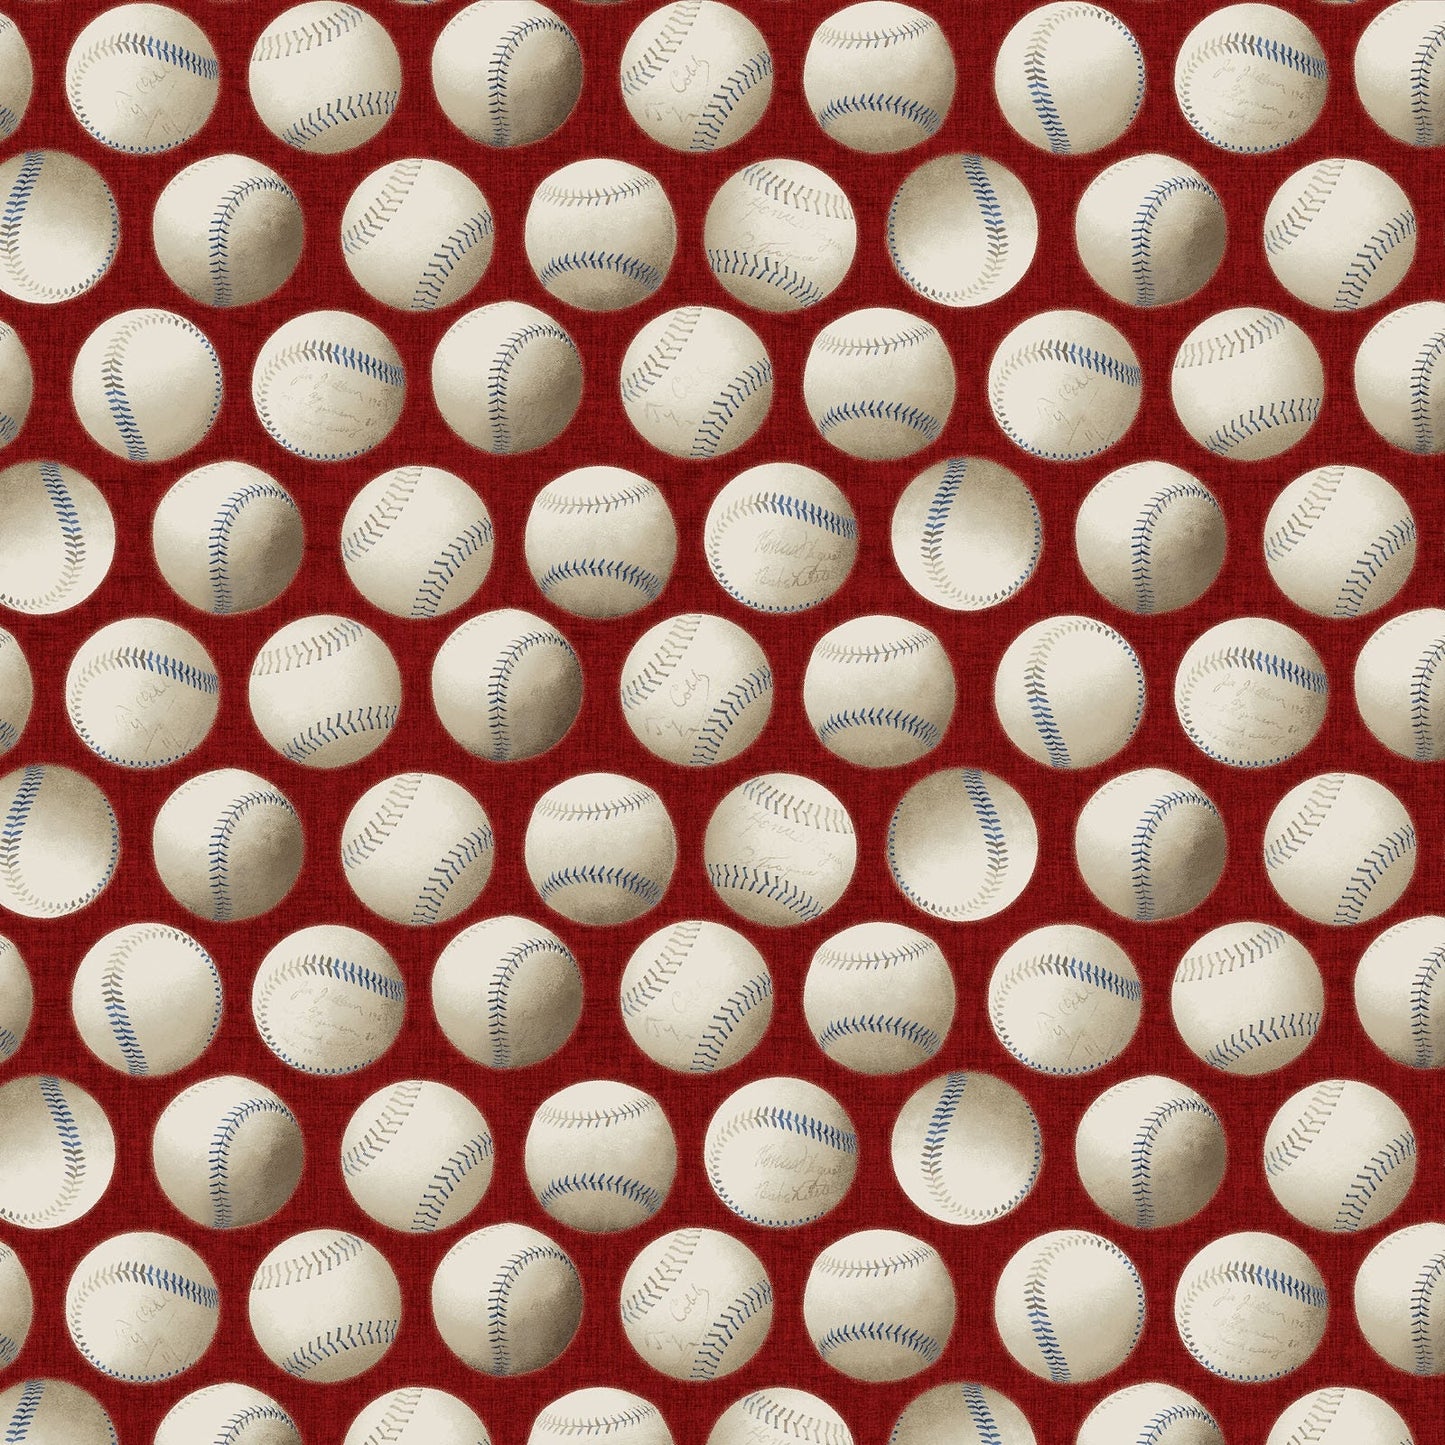 Game Time - Baseballs on Red Fabric